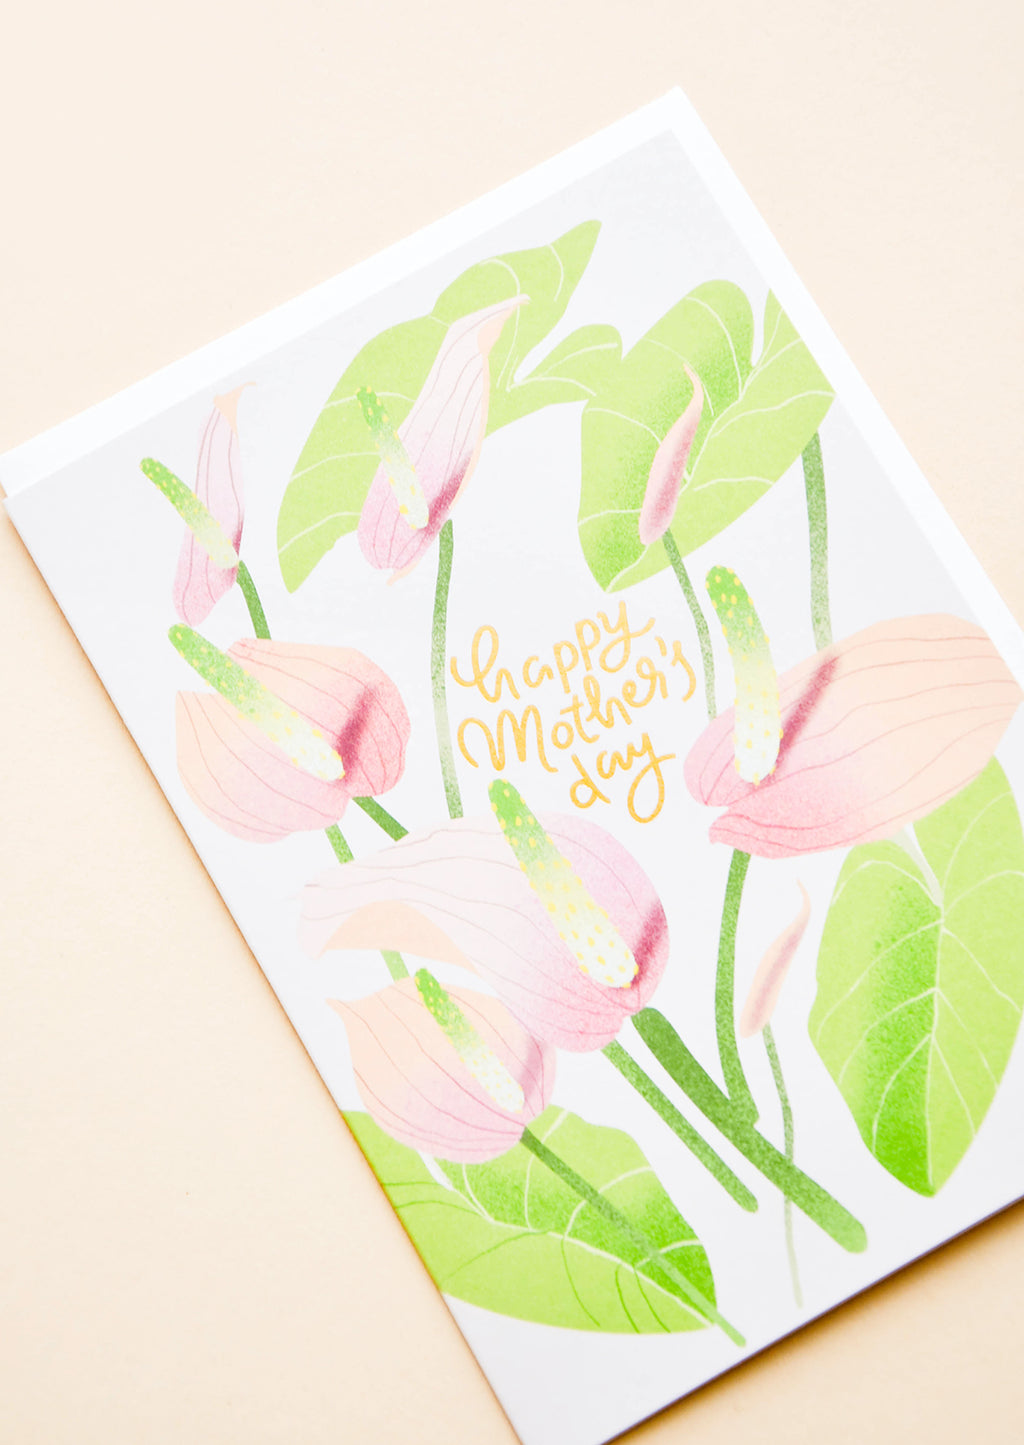 2: Greeting card with painted florals and "Happy Mothers Day" written in gold.